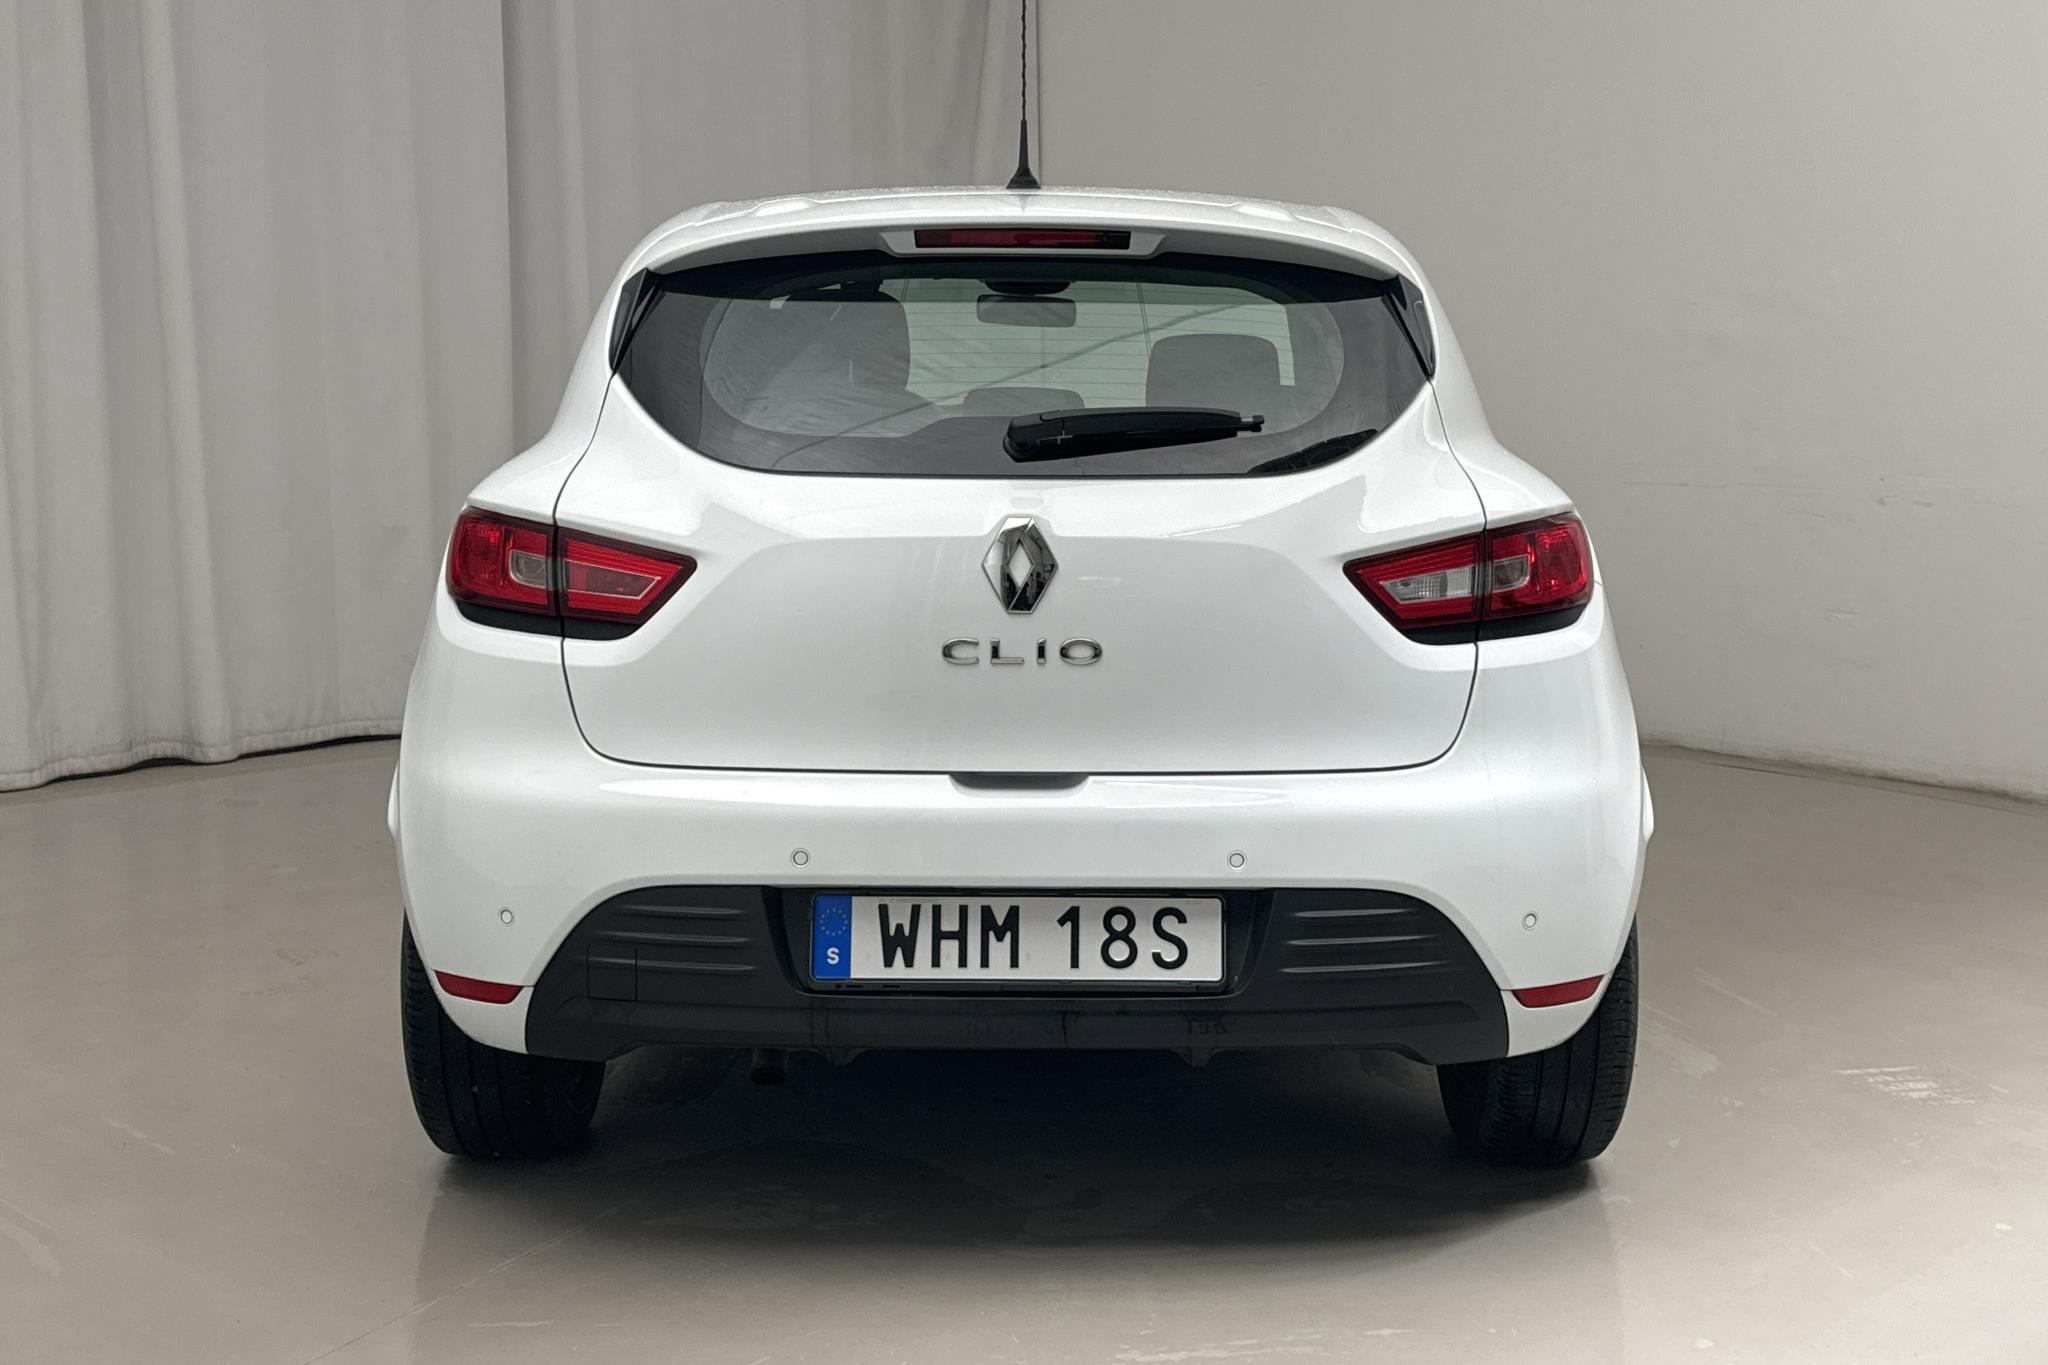 Renault Clio IV 0.9 TCe 90 5dr (90hk) - 93 400 km - Manual - white - 2019